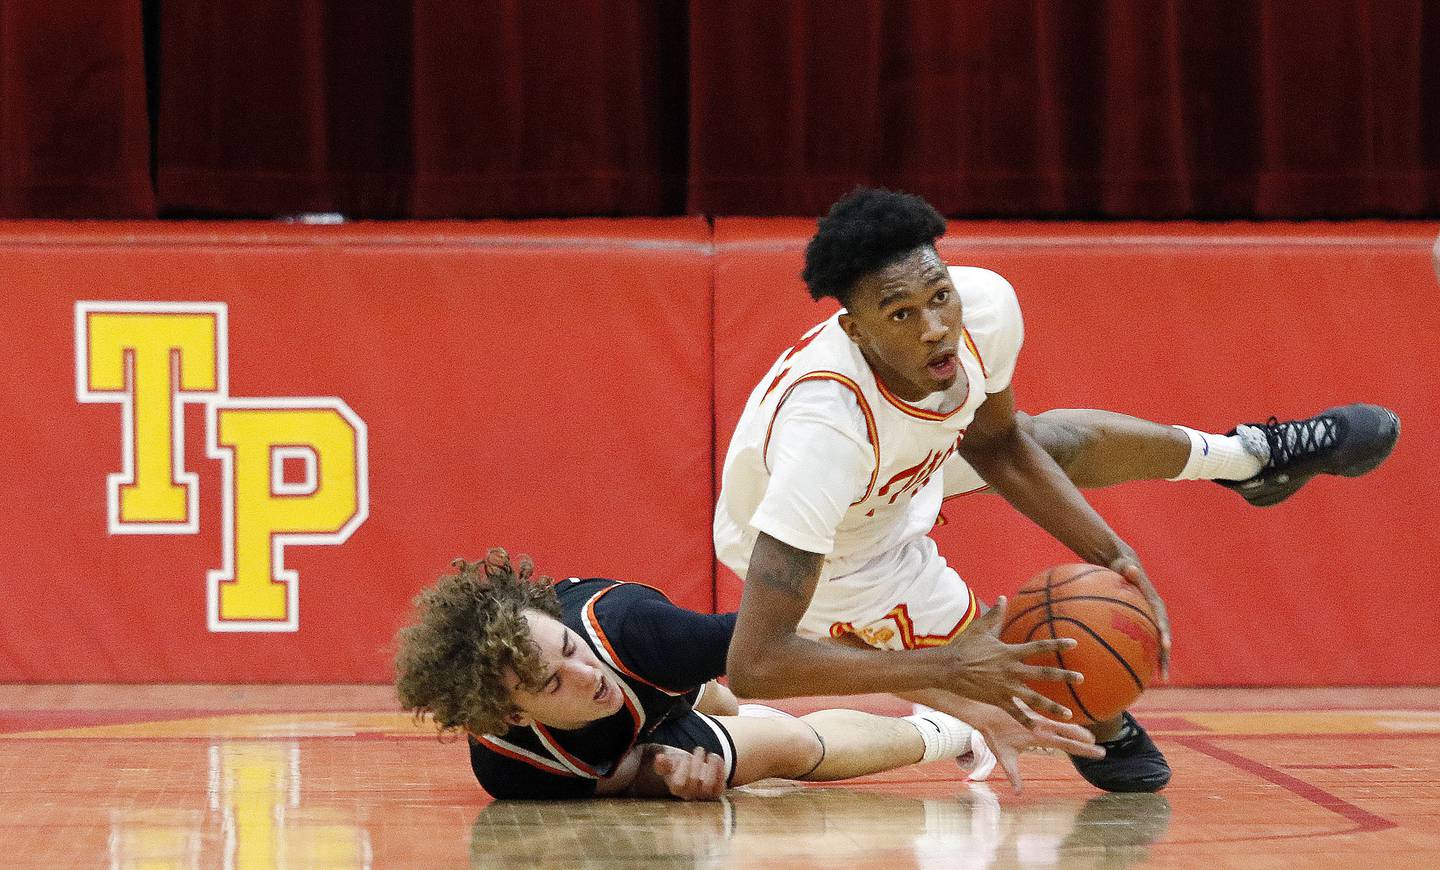 Lincoln-Way West's Jacob Bereza, left, and Tinley Park's Amarion Johnson hit the floor after a loose ball during a nonconference game on Monday Dec. 19, 2022.